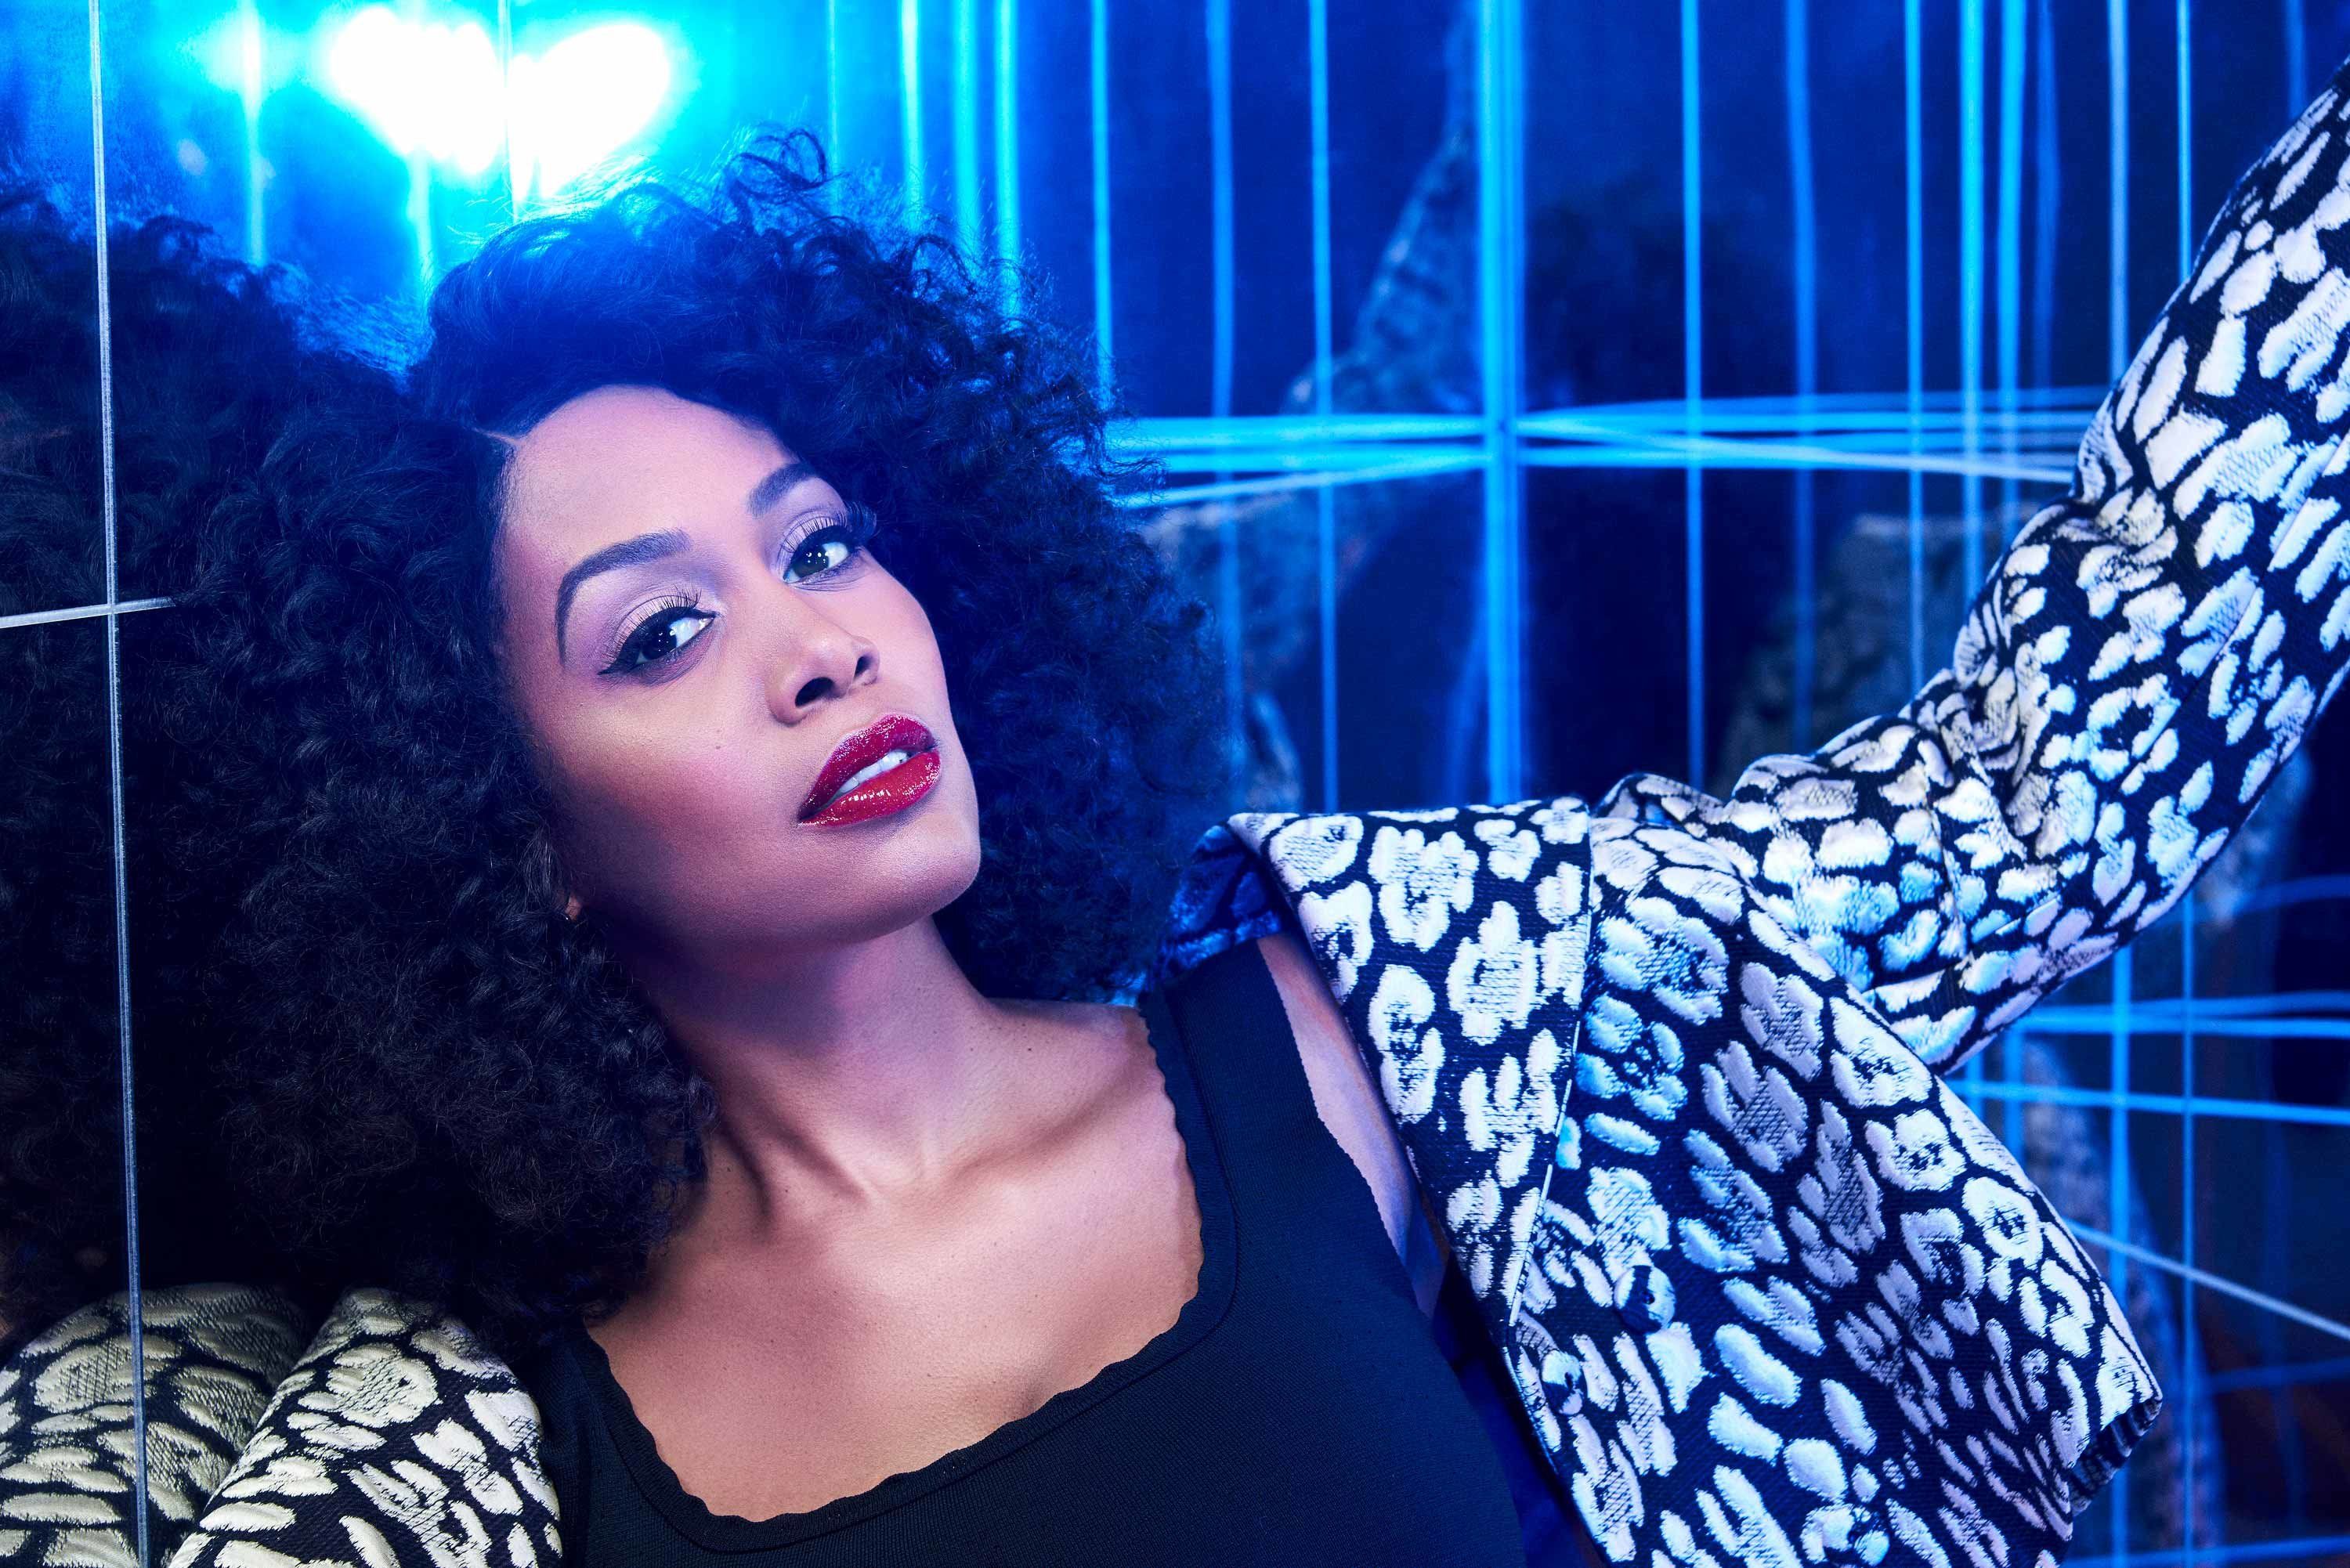 All Rise star Simone Missick wears an embroidered jacket in a stark dark tiled corner.